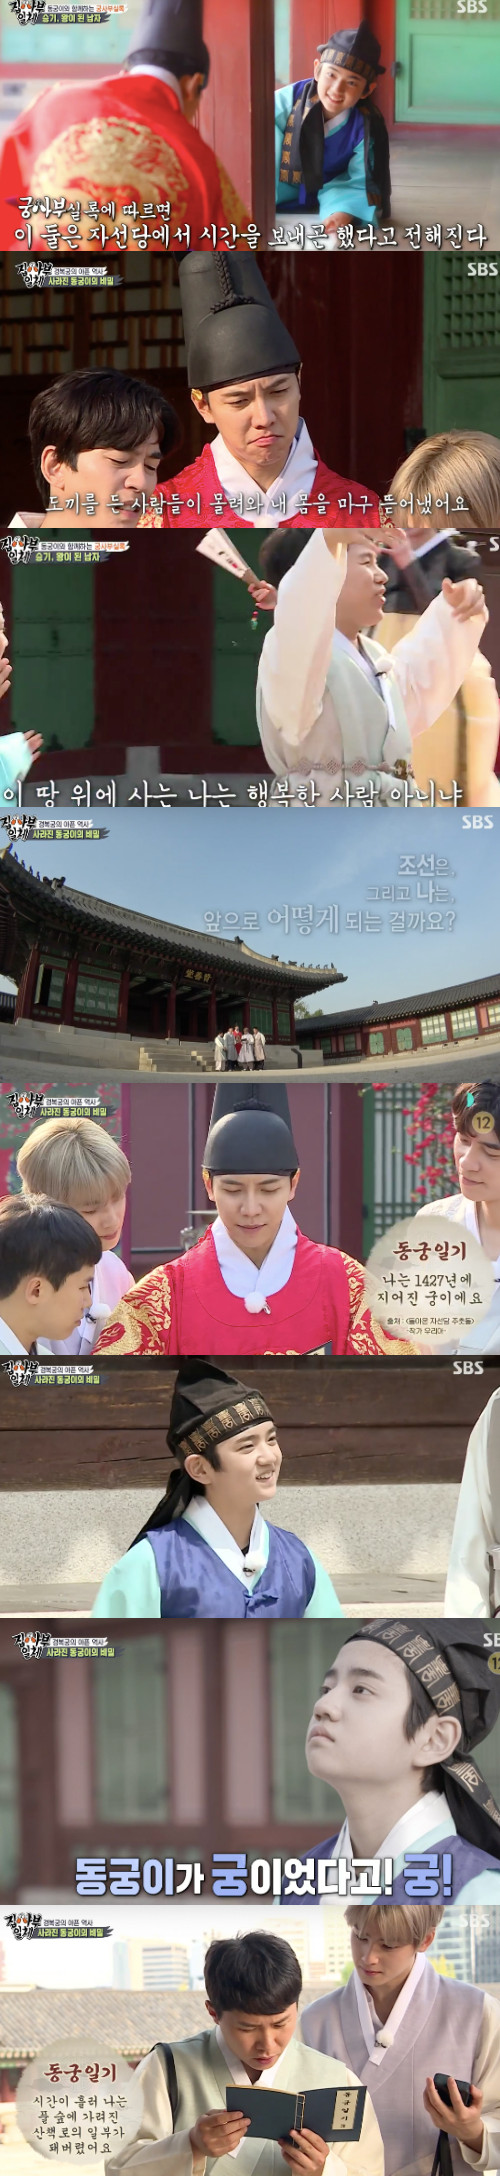 With the first appearance of the Palace in All The Butlers, Gyeongbokgung awakened his enlightenment about Histories.On the 2nd, SBSs All The Butlers was the first to draw a palace master.Choi Tae-seong and child actor Kim Kang-hoon, who will teach Histories on the day, appeared, followed by members arriving, and the Master explained today as Gyeongbokgung.The members said, The building, not a person, is the first and the first in history. Gyongbokgung Master is the first and the best master.In addition, it is the first time that the Gyeongbokgung Tongdae is the first performing arts.The members looked back from the heart of the Joseon Dynasty, saying, Lets feel the joy of Gyoungbokgung.Choi Tae-seong said, There is a palace culture festival in May, and added that it was opened as a gyeonghoeru. Everyone admired the gyeongbokgung, the flower of gyeongbokgung architecture, saying, The scenery is so beautiful.I kept looking around the palace.Choi Tae-seong said that it was a space where the Eumi incident took place, and that the members said that they had a heartbreaking history. The members said that they were heartbroken. Kim Kang-hoon said, I learned it as a textbook, it would have been too scary.Choi Tae-seong explained that Guncheonggung is the space where the modern civilization is the fastest accepted, and the first place in Korea where the light is lit. Lee Seung-gi said, Gyeongbokgung is also a place where people live.At this time, Goodbye My Princess has disappeared Kim Kang Heon and the atmosphere changed 180 degrees.Then, I found out that Goodbye My Princess was a diary, and all of them were the palace of the east, Goodbye My Princess was not a man, it was a palace.I learned about the shocking past that auctioned Gyoungbokgung, and I was heartbroken by all the sick histories more than 100 years ago.Later, through the Goodbye My Princess diary, I headed to Geunjeongjeon.However, it was not restored, but originally found that the charity was in the backyard of the palace, but only the place remained.Choi Tae-seong said, The royal philanthropy party where Cesar and Cesar were located, in fact, it is normal on this base.The pavilion of Gyeongbokgung went into auction, and the sad Histories, which had become a private museum of Japanese people, were also reported.In addition, the Charity Party, which was a wooden building at the time, was destroyed by a fire due to the earthquake in Kanto.In particular, it was reported that Professor Kim Jung-dong devoted his life to the return of the charity party.He made efforts to rebuild the bitter histories without forgetting, and told the back story that he was returned to Gyongbokgung in 1996.In the story of the backyard of the palace, the members said that they had restored the story by regaining the history that was almost erased, saying, If you did not know these histories, you would pass by.Choi Tae-seong said, It is a way to find one thing, restore lost stories and stories, and convey them to later generations. This is the teaching of the Gyoungbokgung Master.Capture All The Butlers Broadcast Screen